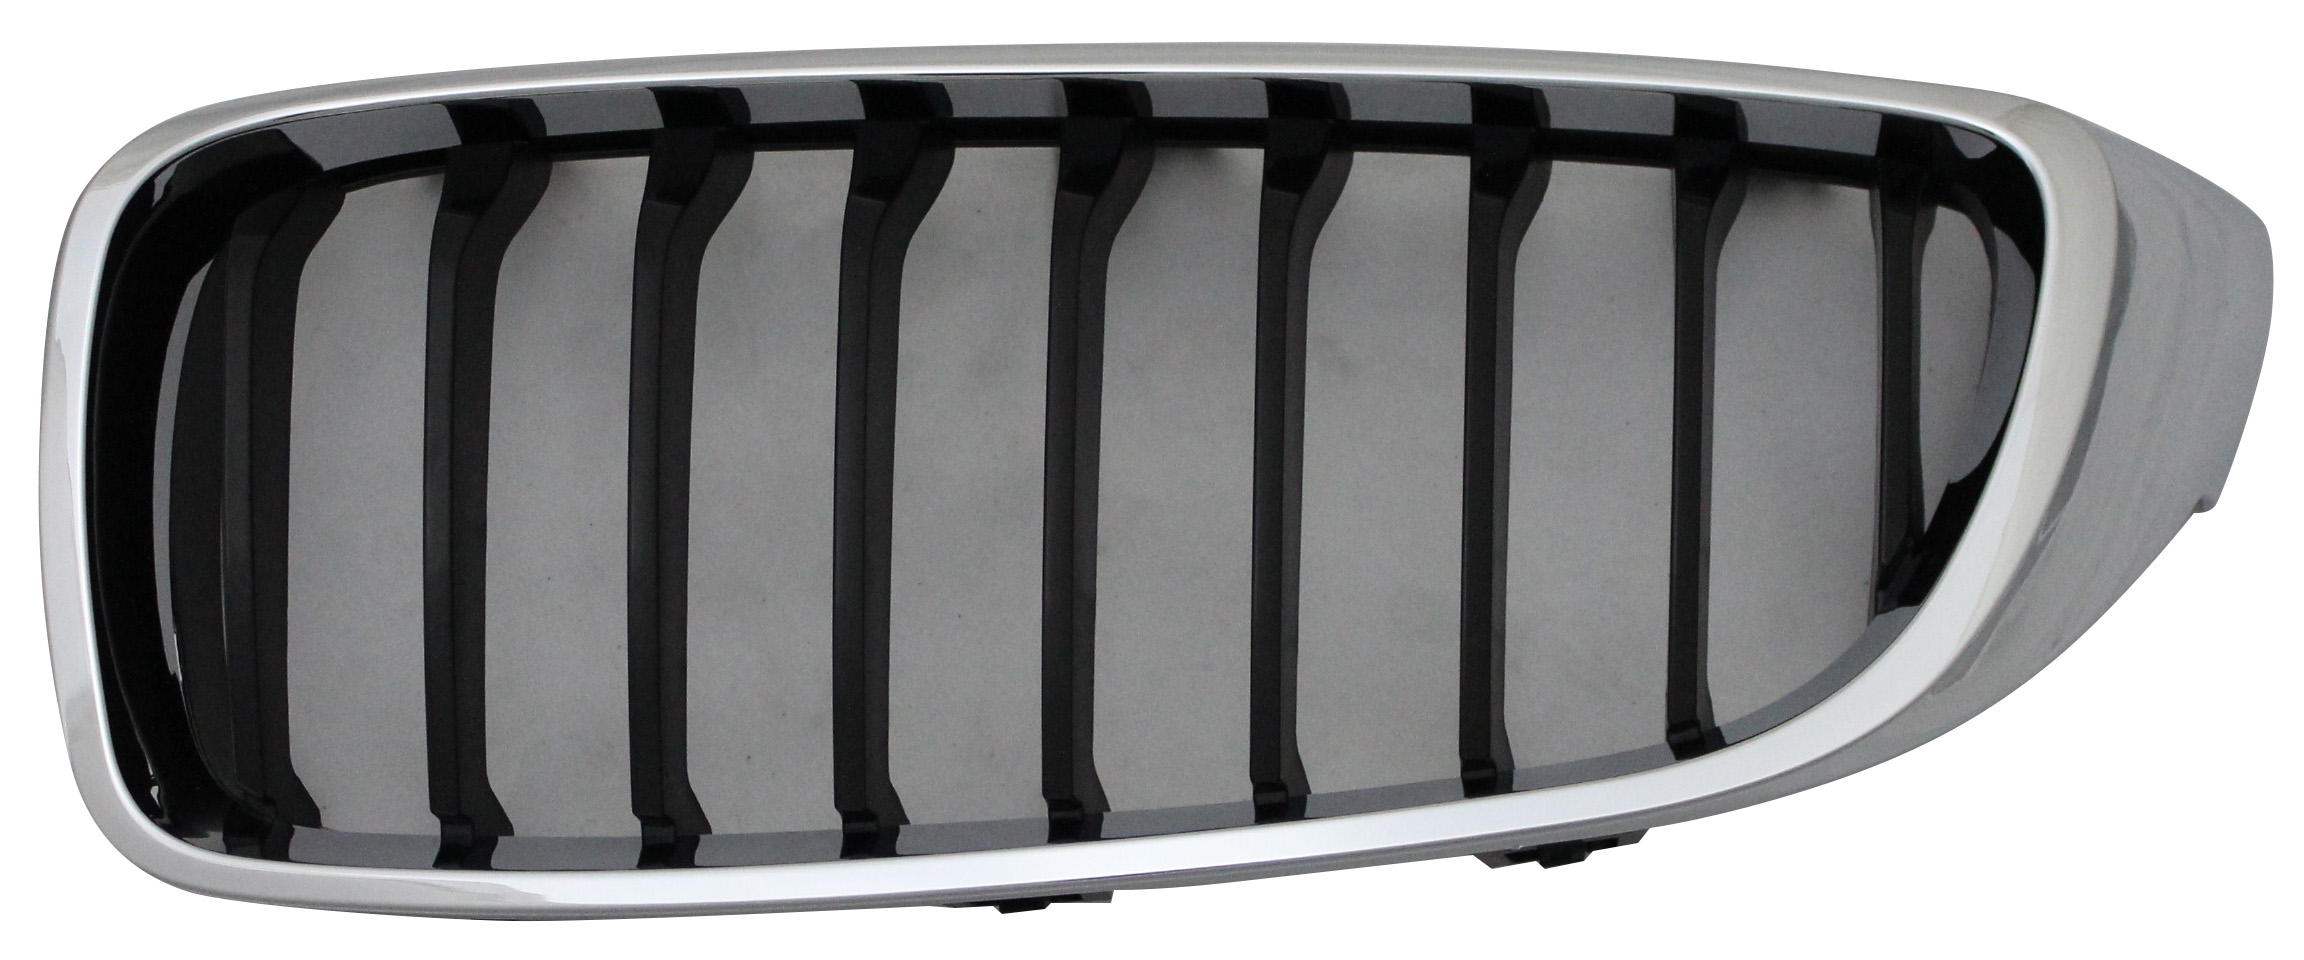 Aftermarket GRILLES for BMW - 435I GRAN COUPE, 435i Gran Coupe,15-16,Grille assy